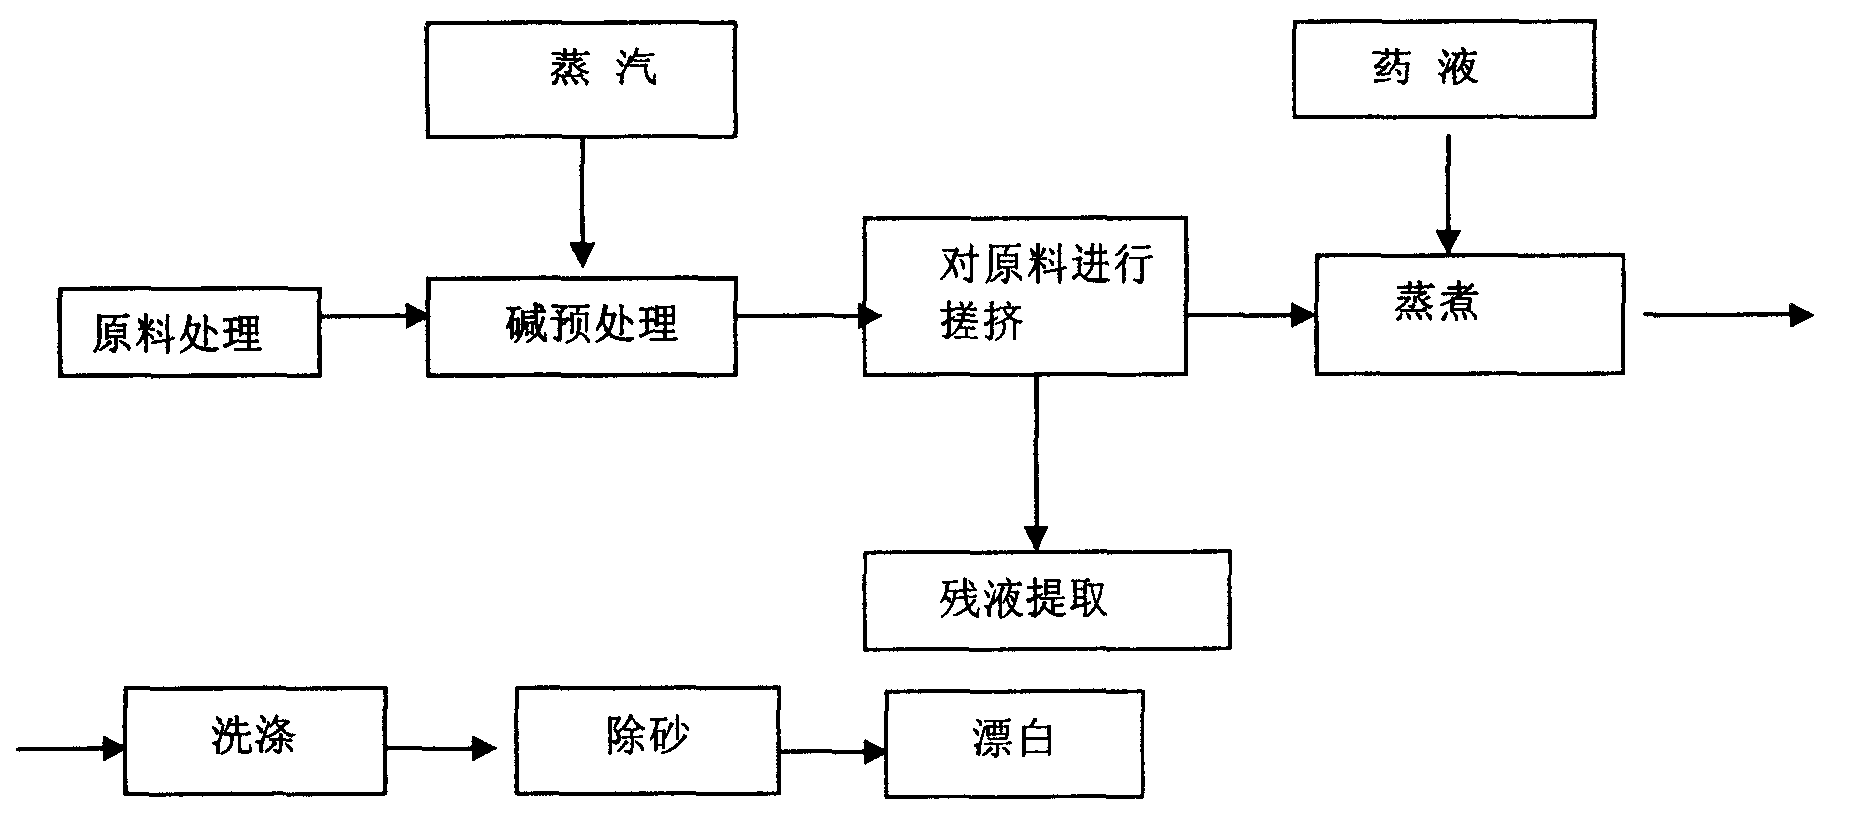 Method for producing chemical fiber pomace with fiber as raw material